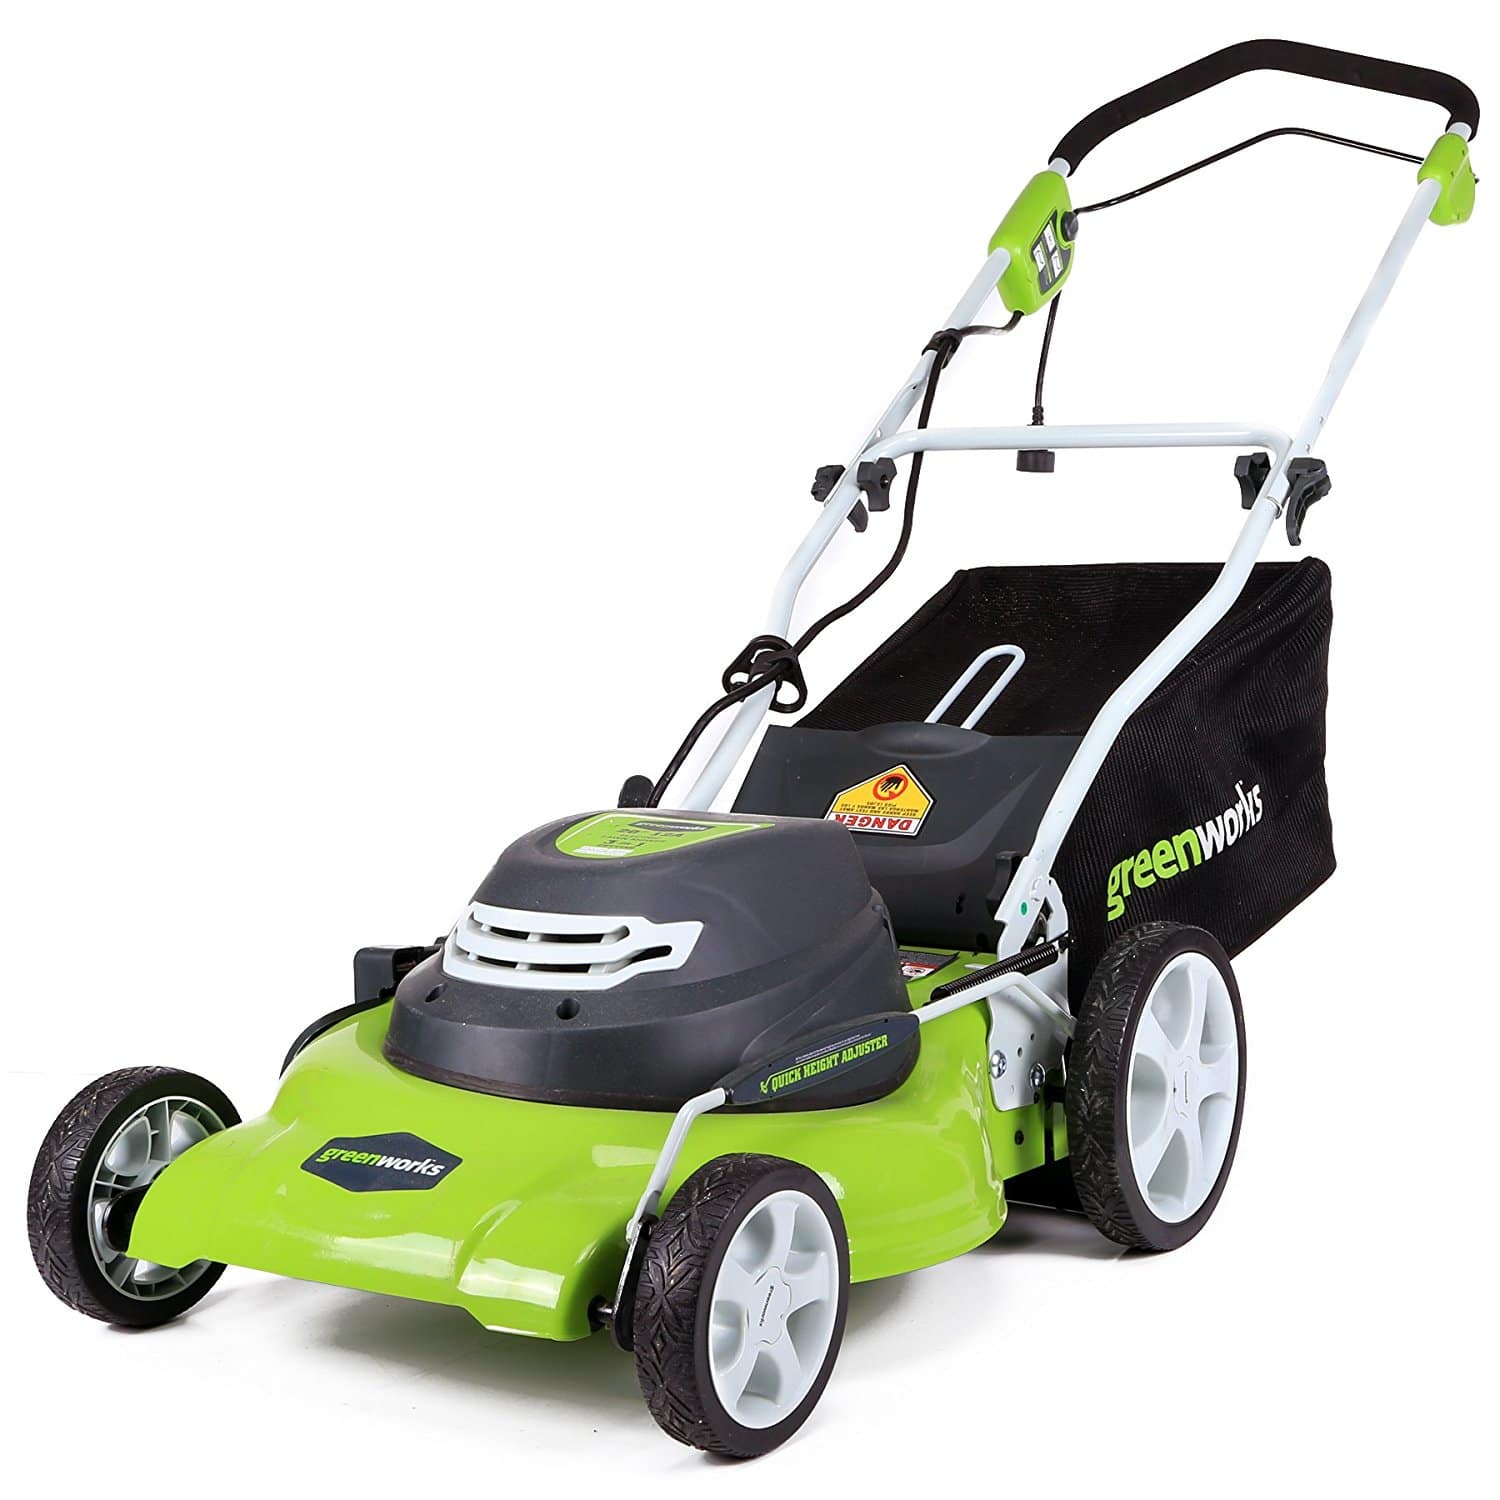 GreenWorks 20 Inch 12 Amp Corded Lawn Mower